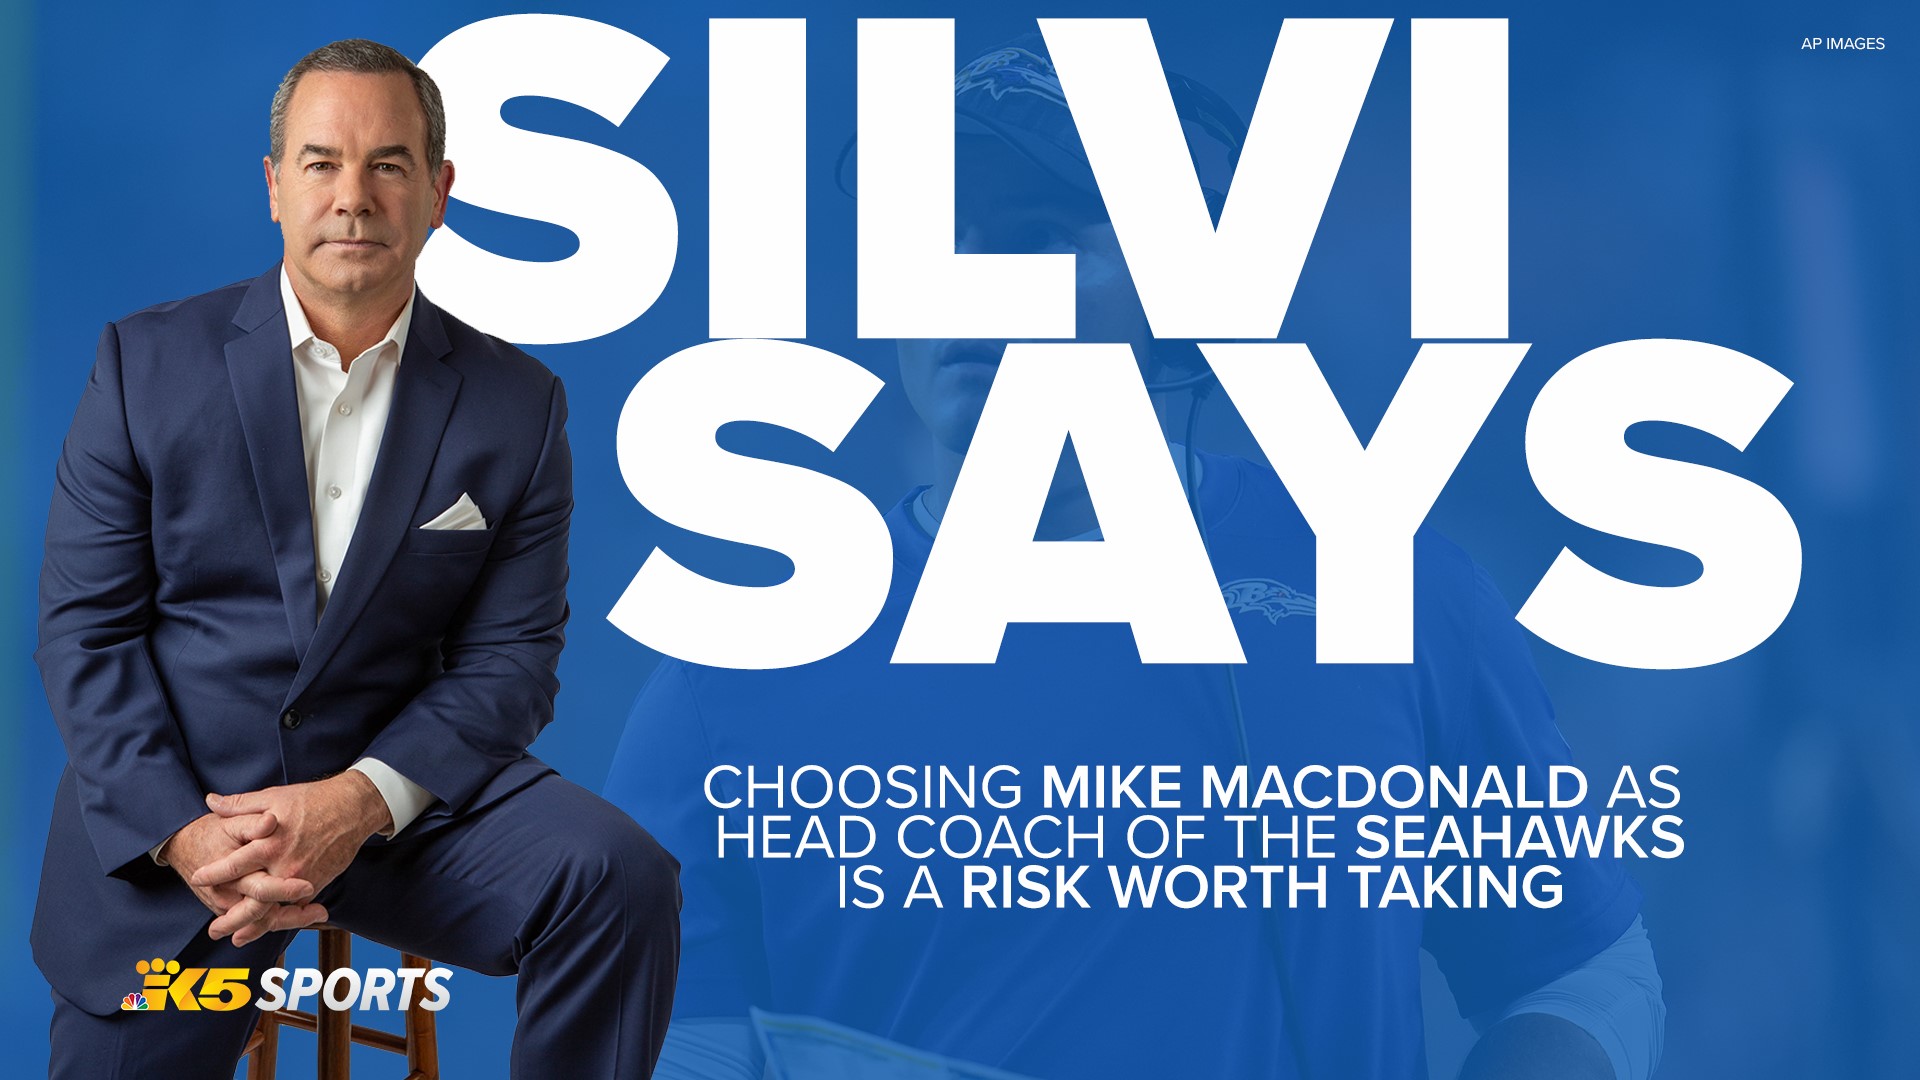 Seattle Seahawks' new head coach Mike Macdonald is now the youngest head coach in the NFL. Paul Silvi weighs in on why this decision is a risk worth taking.